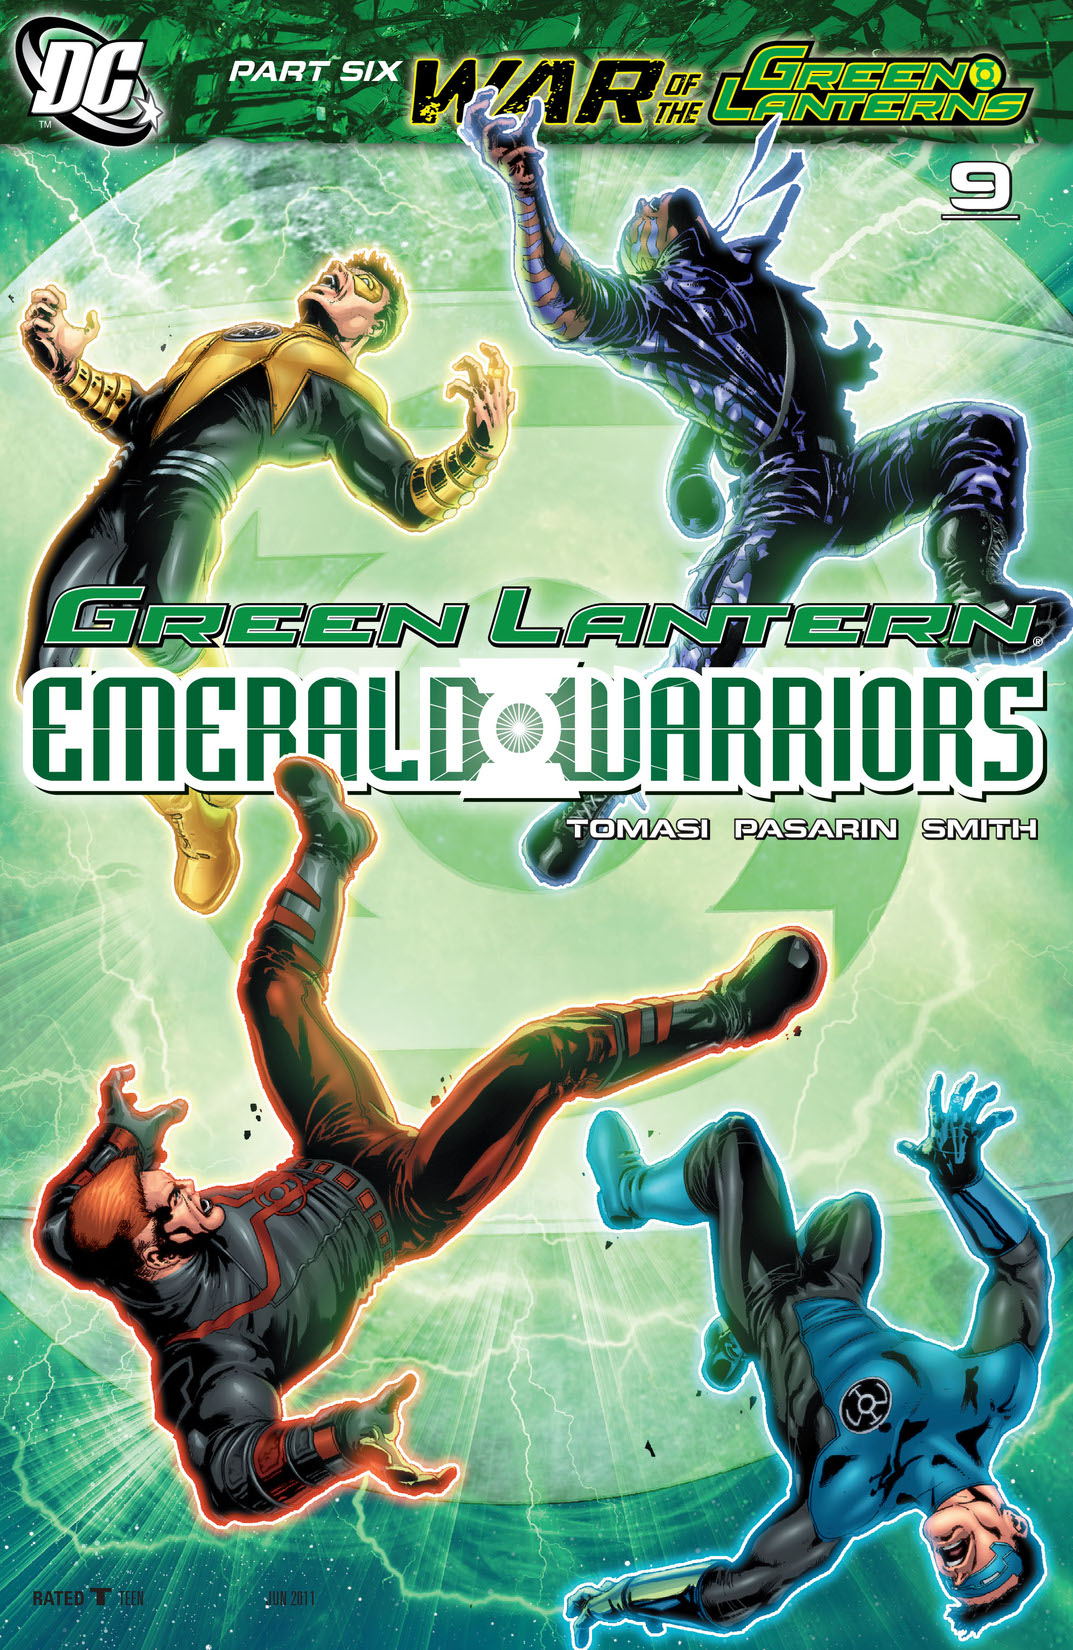 Green Lantern: Emerald Warriors #9 preview images